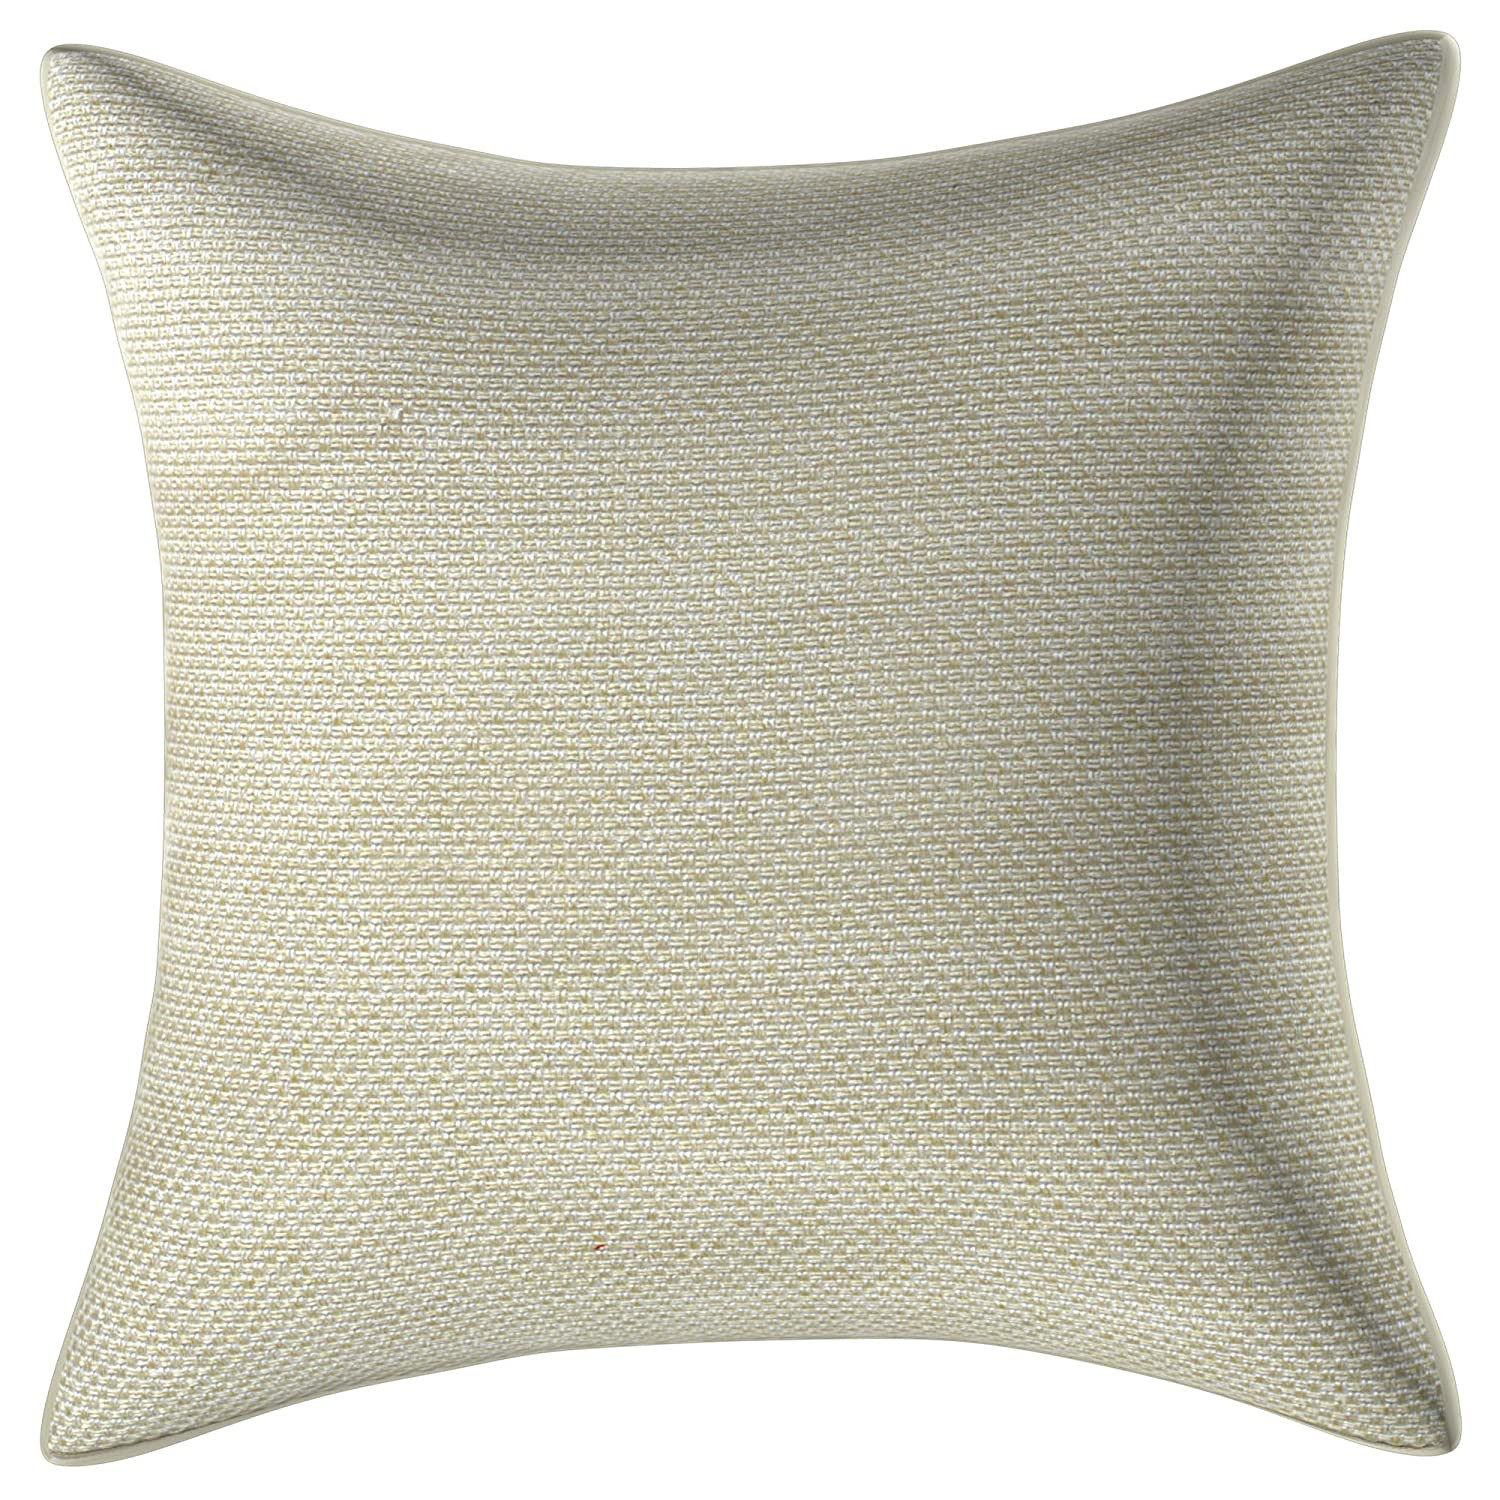 Kuber Industries Jute Blend Decorative Square Throw Pillow Cover Cushion Covers Pillowcase, Home Decor Decorations for Sofa Couch Bed Chair 16x16 Inch-(Cream)